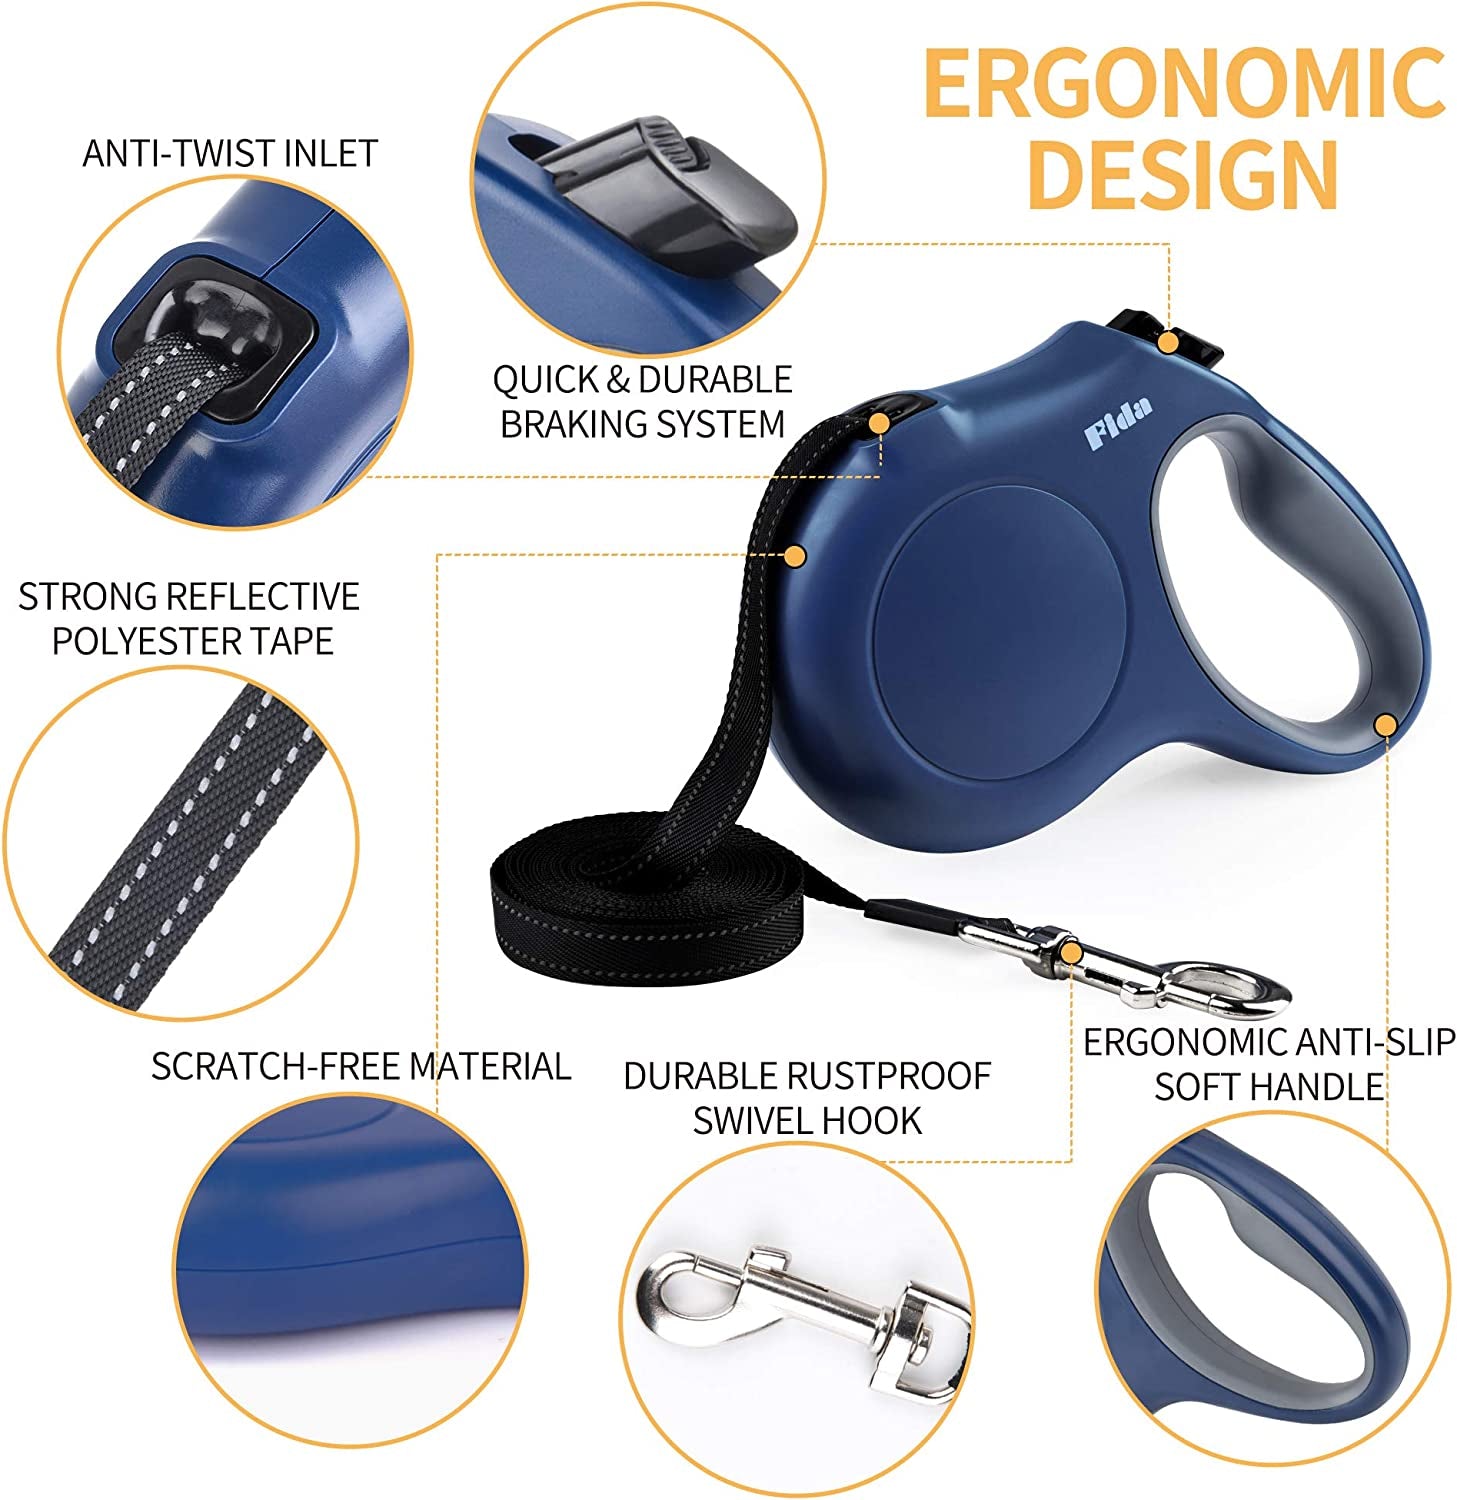 Retractable Dog Leash with Dispenser and Poop Bags, 16 Ft Pet Walking Leash for Large Dog up to 110 Lbs, Anti-Slip Handle, Tangle Free, Reflective Nylon Tape (L, Navy Blue)